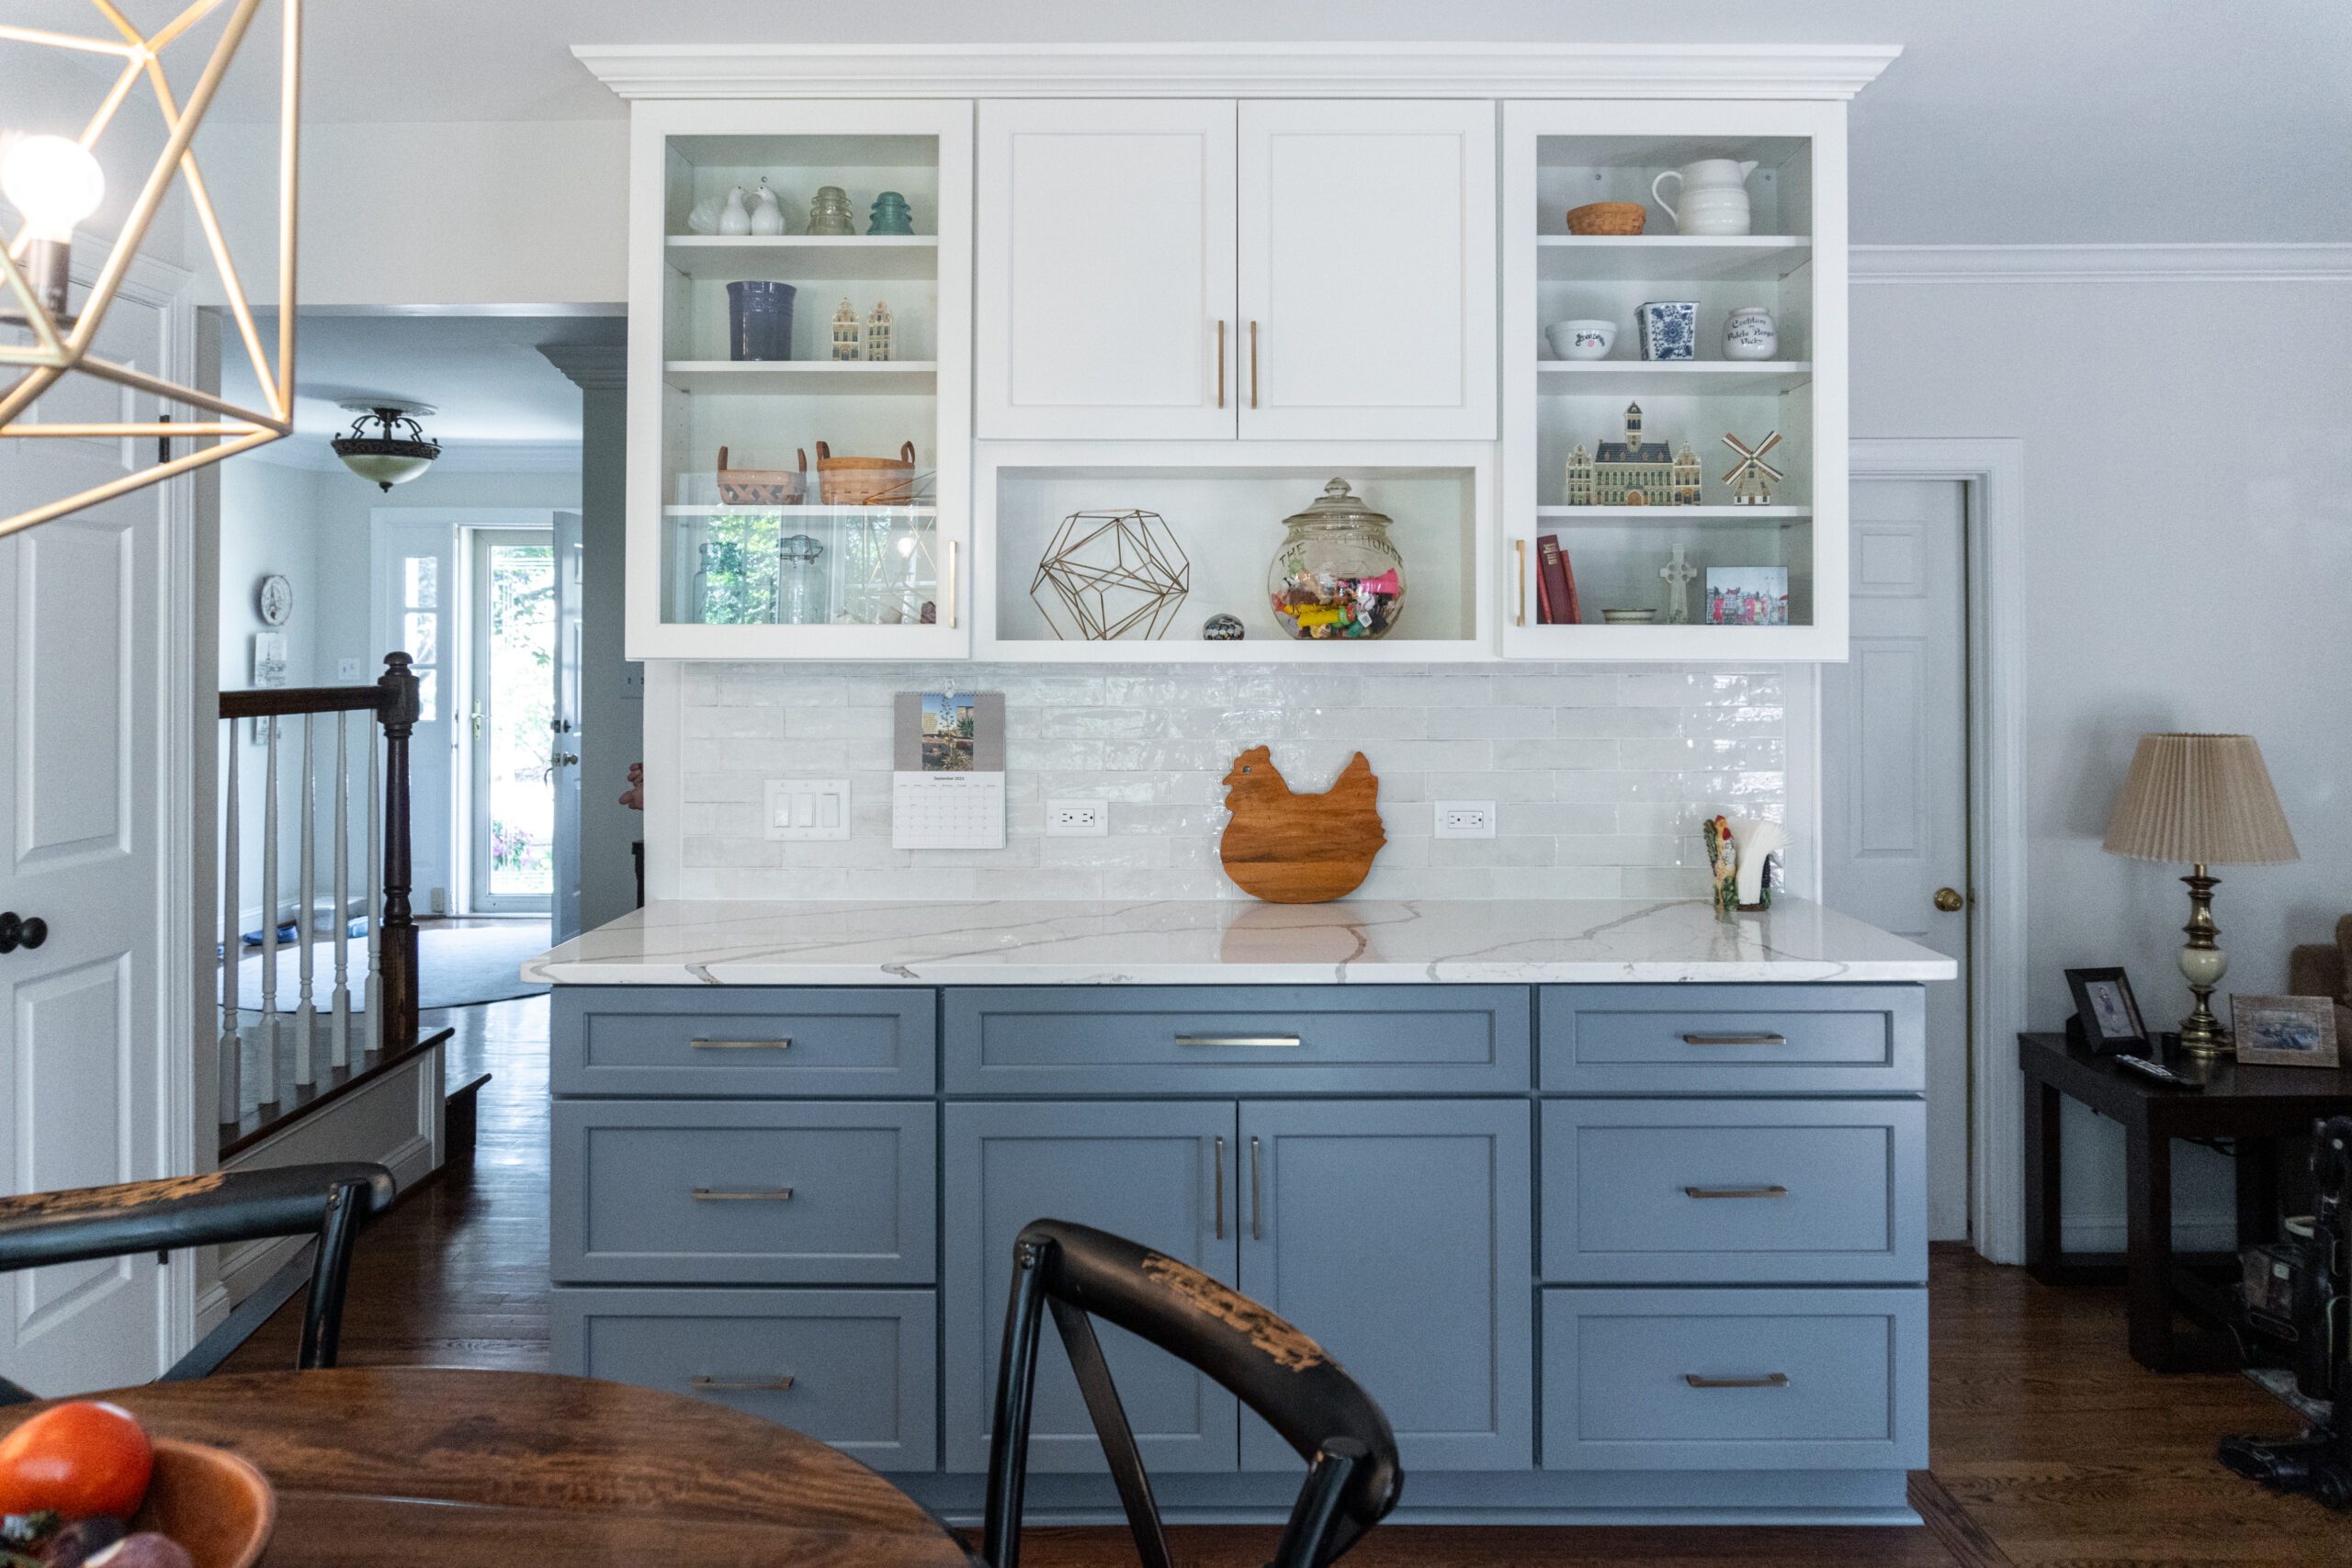 Gallery - Kitchens - Heartland Design and Remodeling